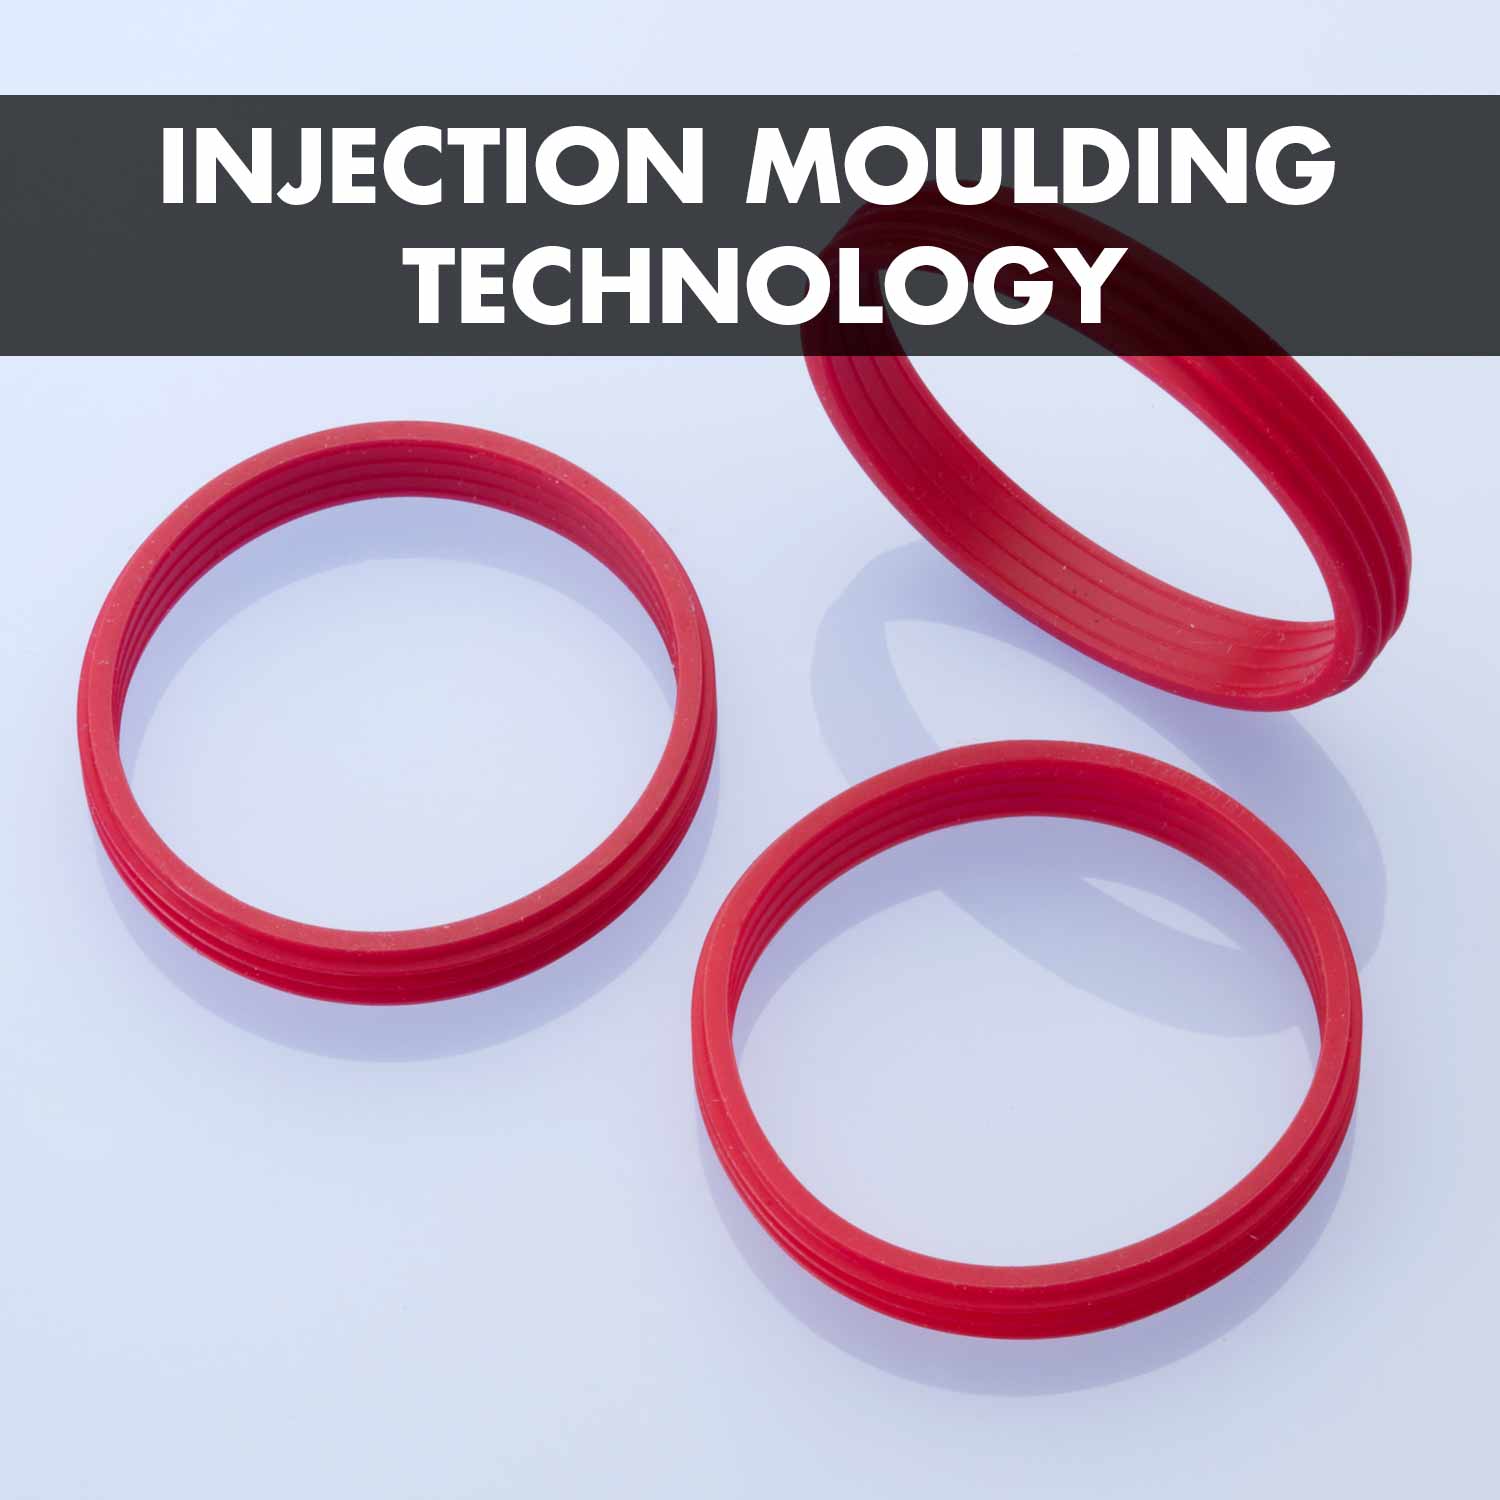 Injection moulding technology